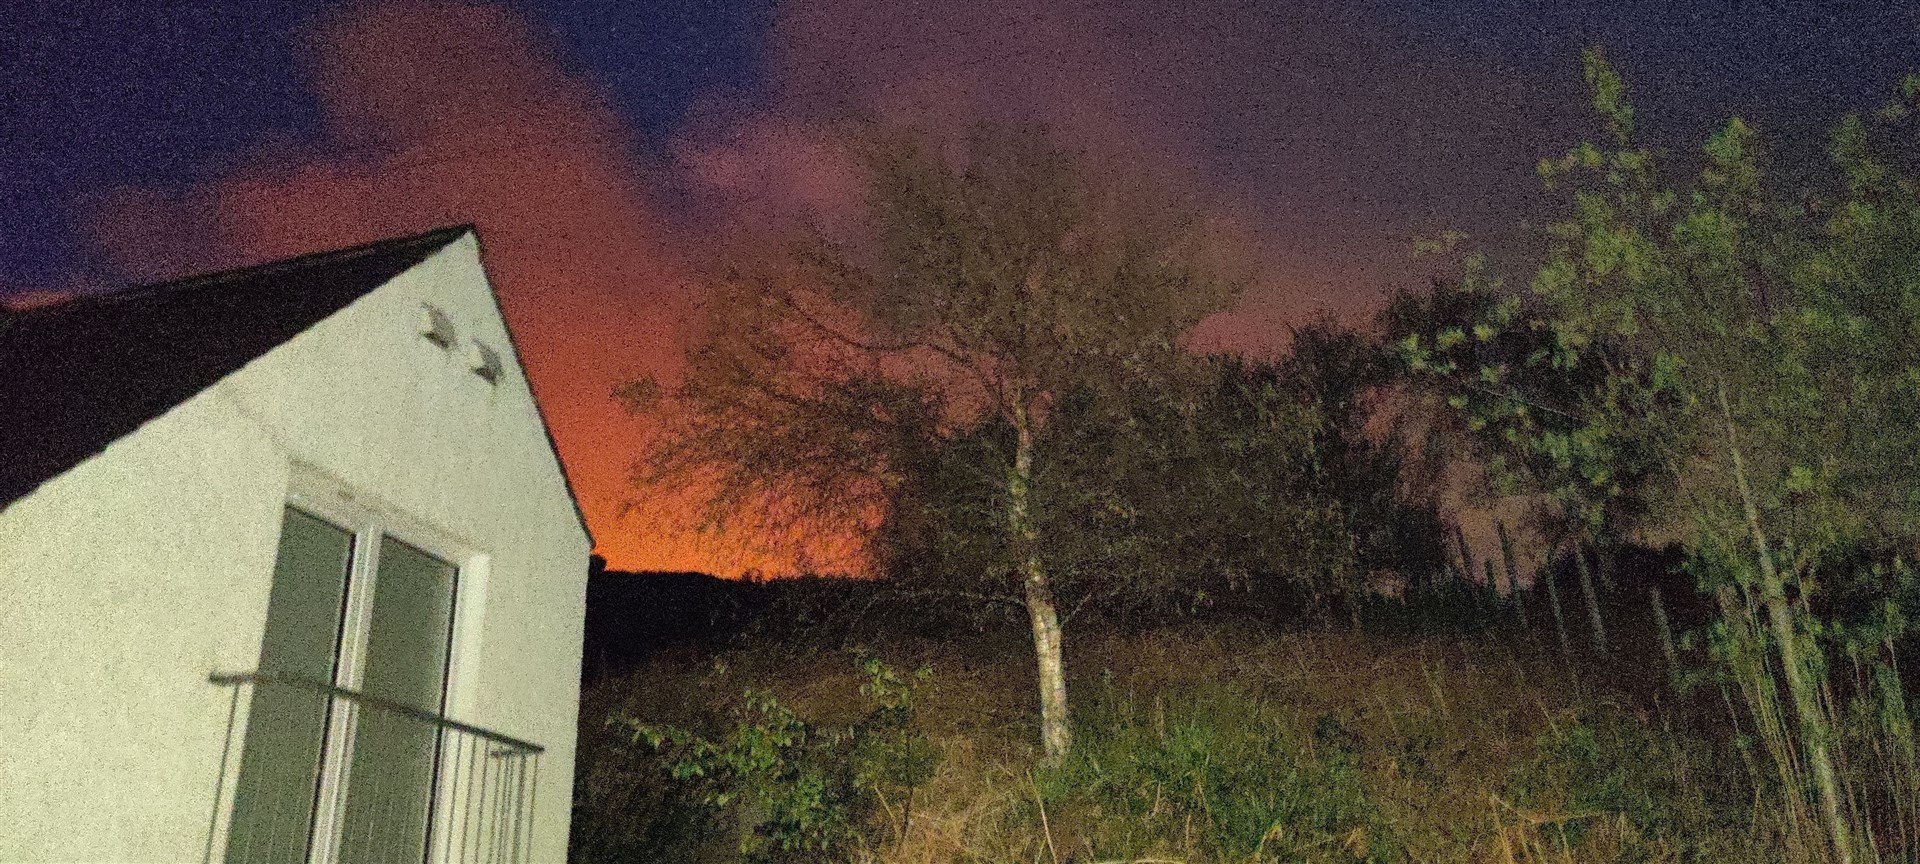 Flames light the night sky near Kyle. Picture: Andy MacDonald